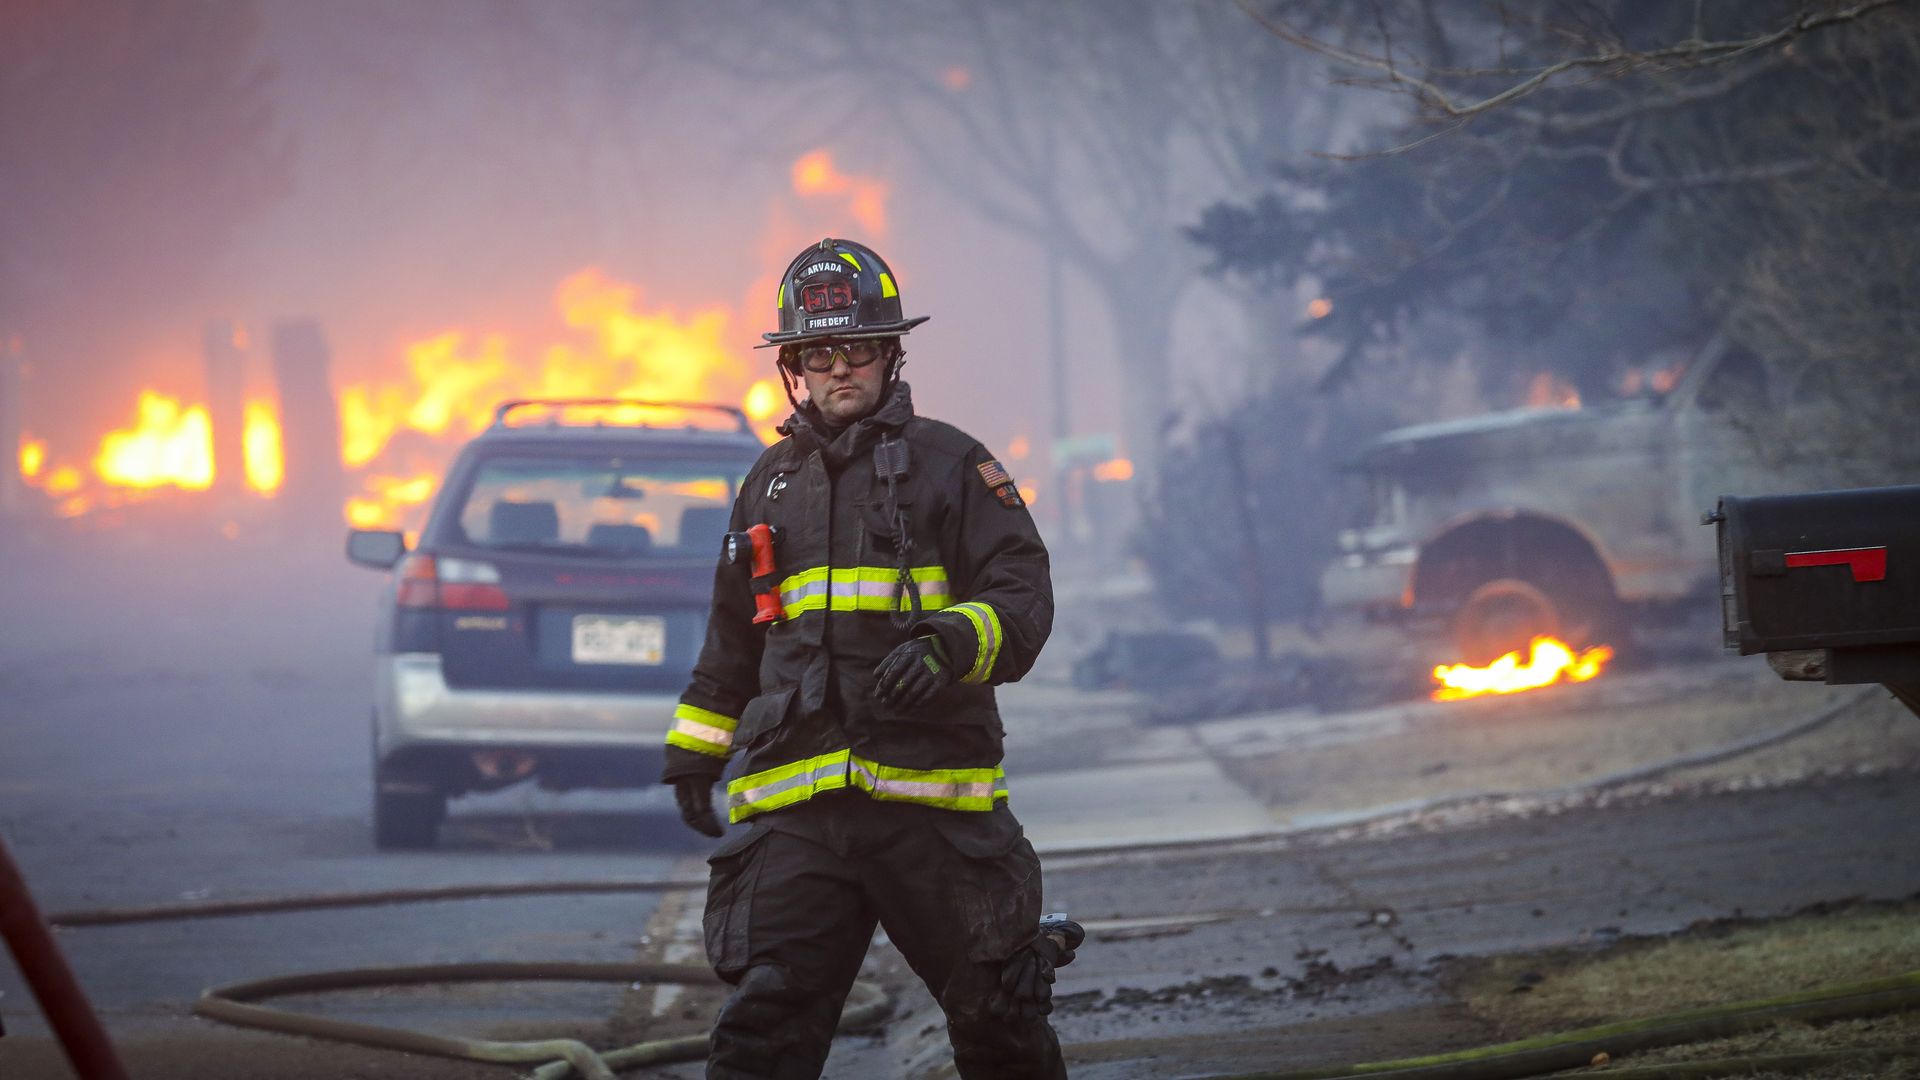 An Arvada firefighter walks back to the firetruck as a fast moving wildfire swept through the area in a Louisville neighborhood, destroying cars and homes. Photo: Marc Piscotty/Getty Images